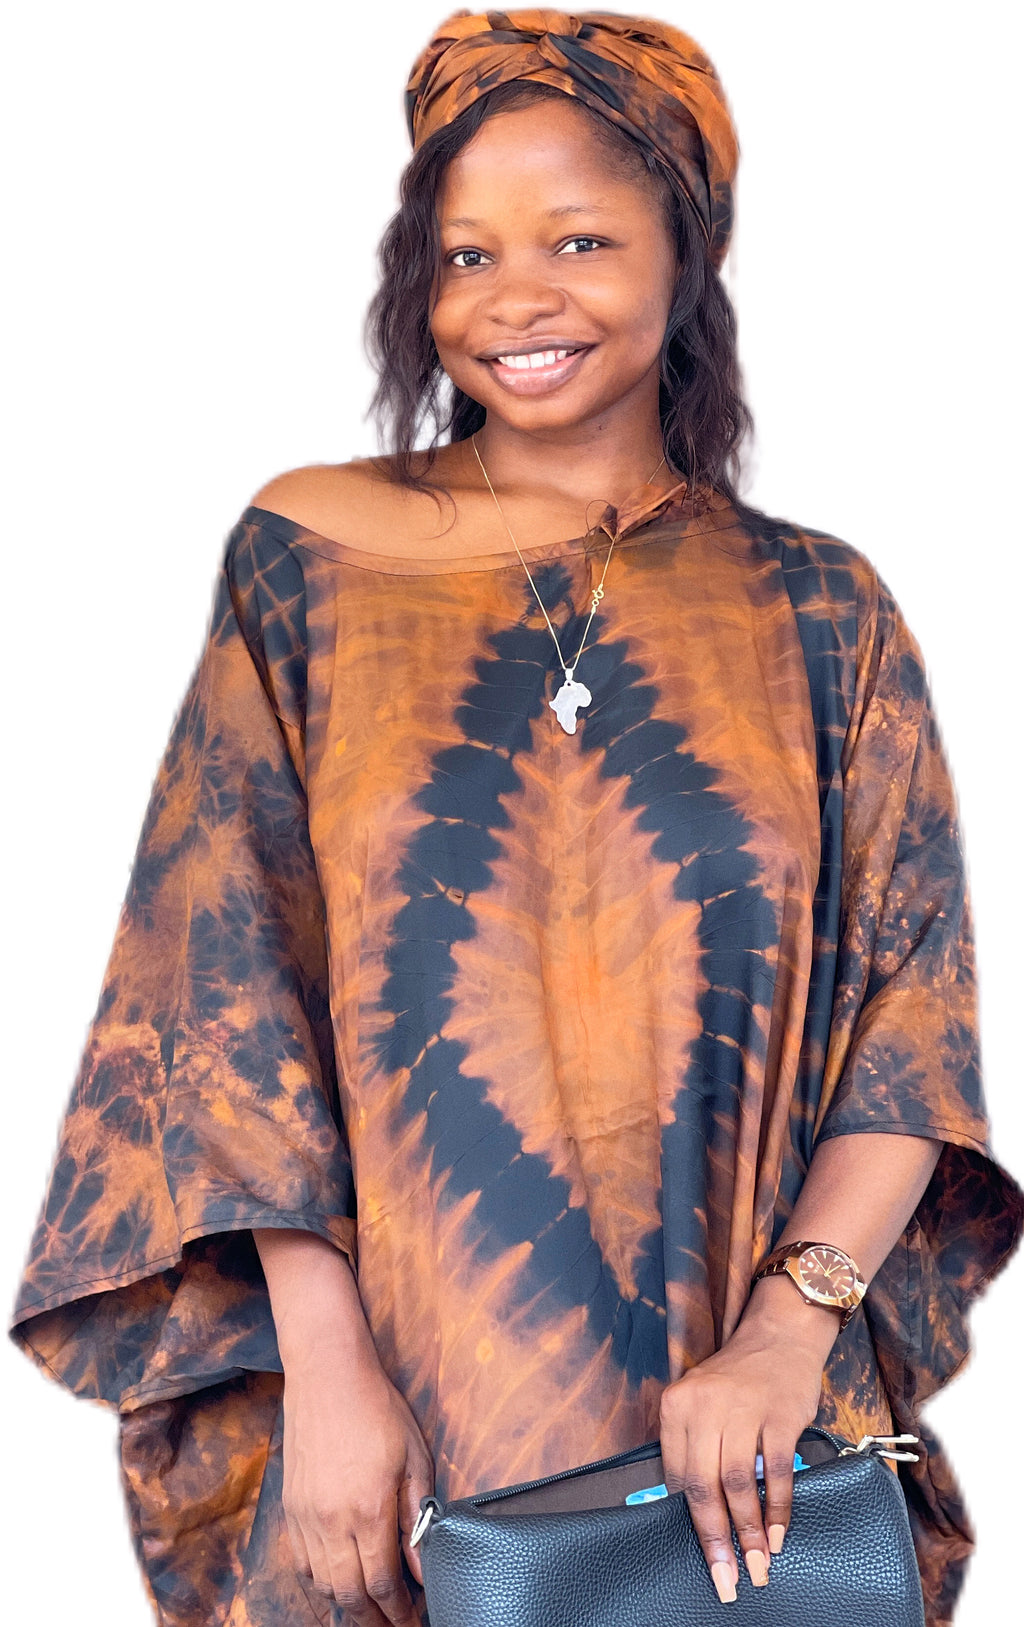 SILK ADIRE BOUBOU ( fit all sizes)